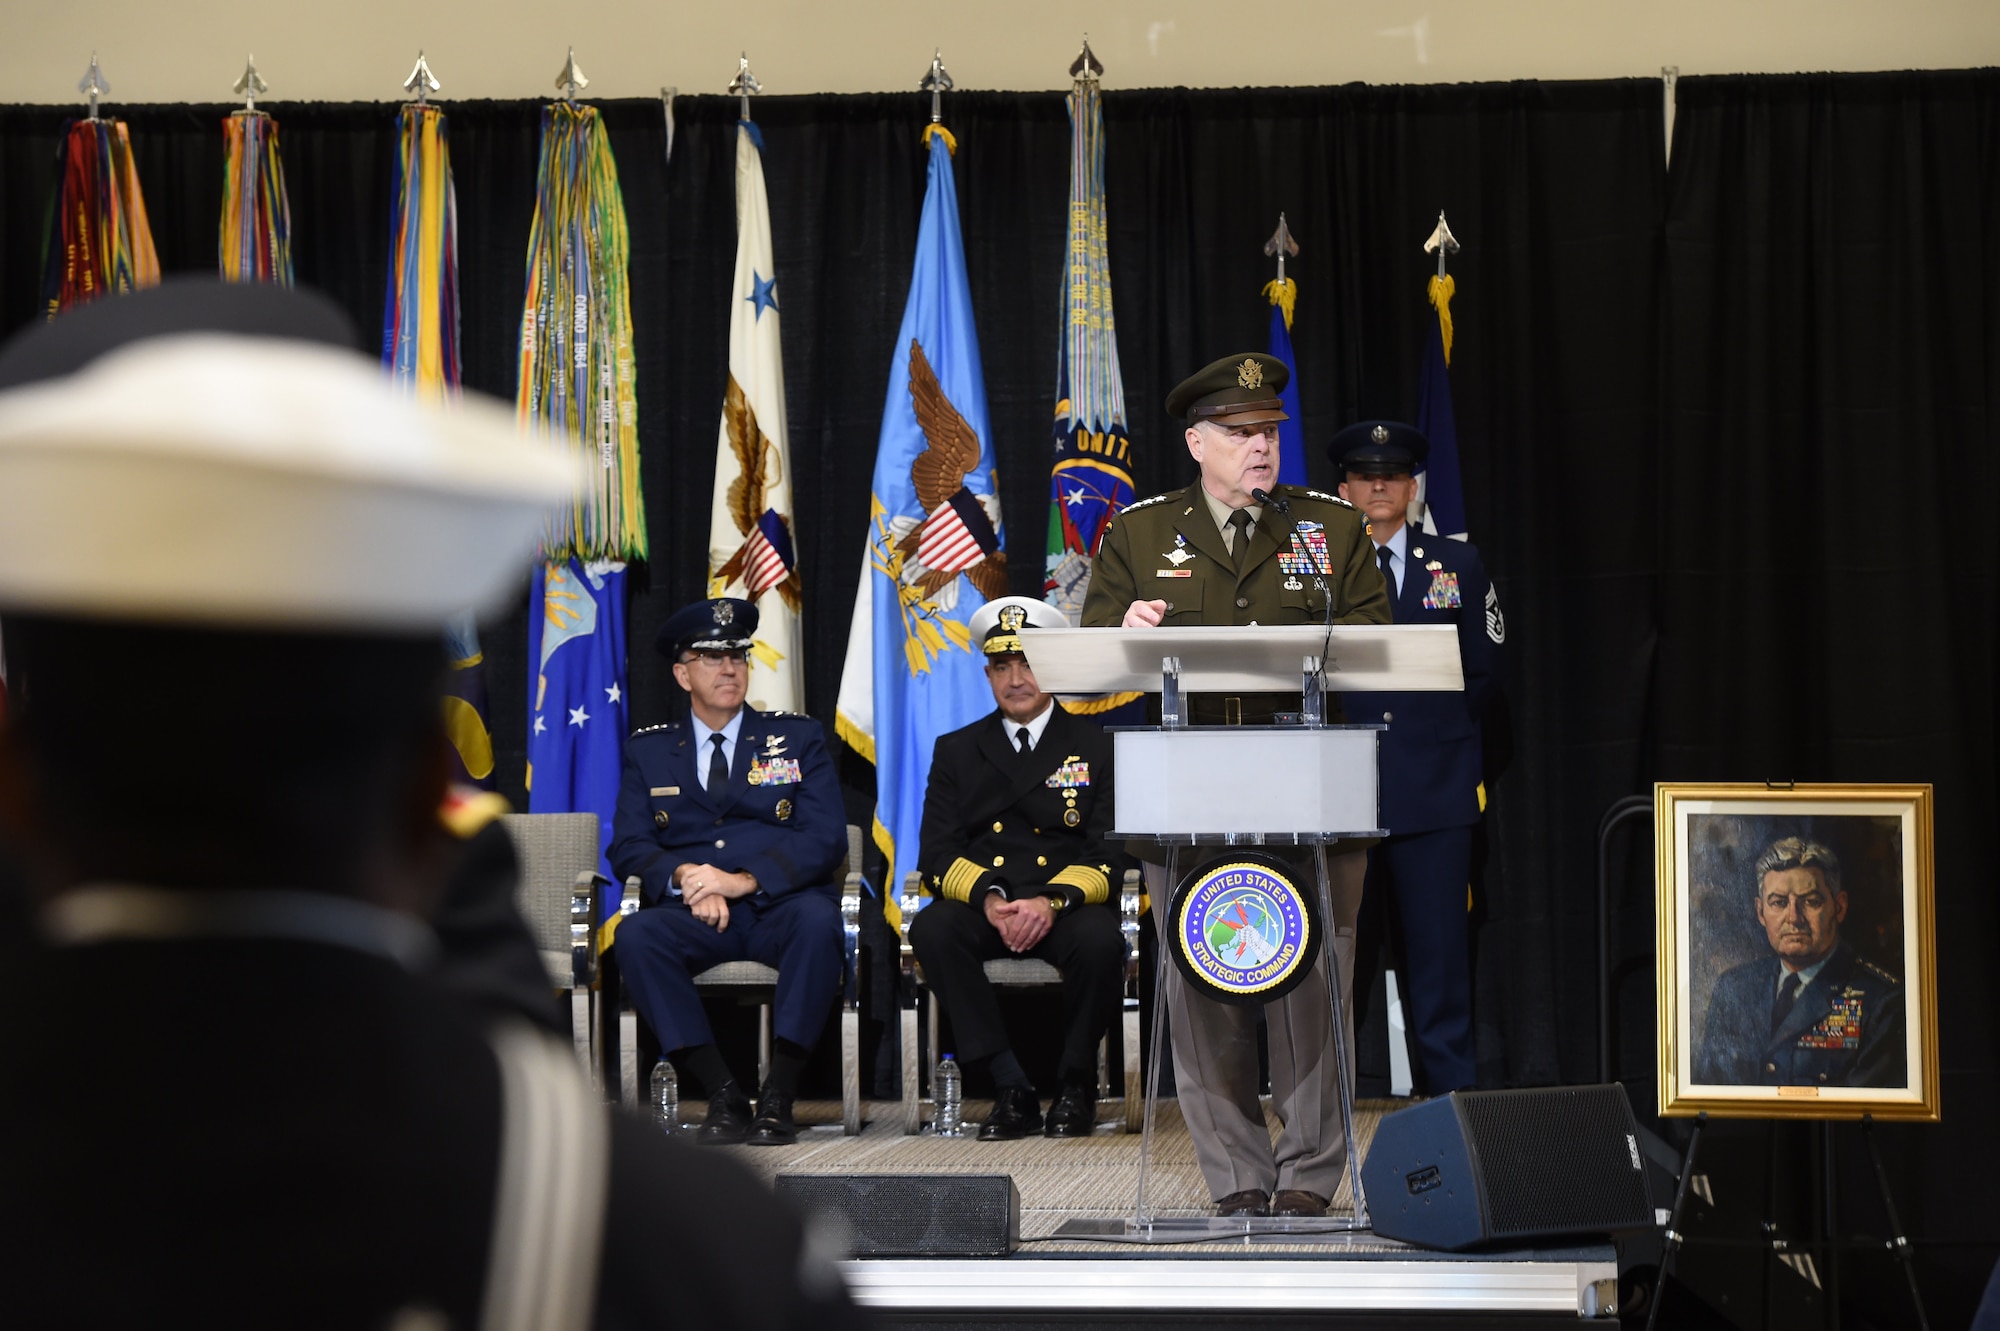 U.S. Army Gen. Mark A. Milley, chairman of the Joint Chiefs of Staff, provides remarks during USSTRATCOM's change of command ceremony at Offutt Air Force Base, Neb., Nov. 18, 2019. Milley congratulated U.S. Navy Adm. Charles A. Richard on his appointment as the new commander of USSTRATCOM. Richard comes to USSTRATCOM after serving as commander of Submarine Forces; commander of Submarine Force Atlantic and commander of Allied Submarine Command at Naval Station Norfolk, Va. (U.S. Air Force photo by Staff Sgt. Ian Hoachlander)